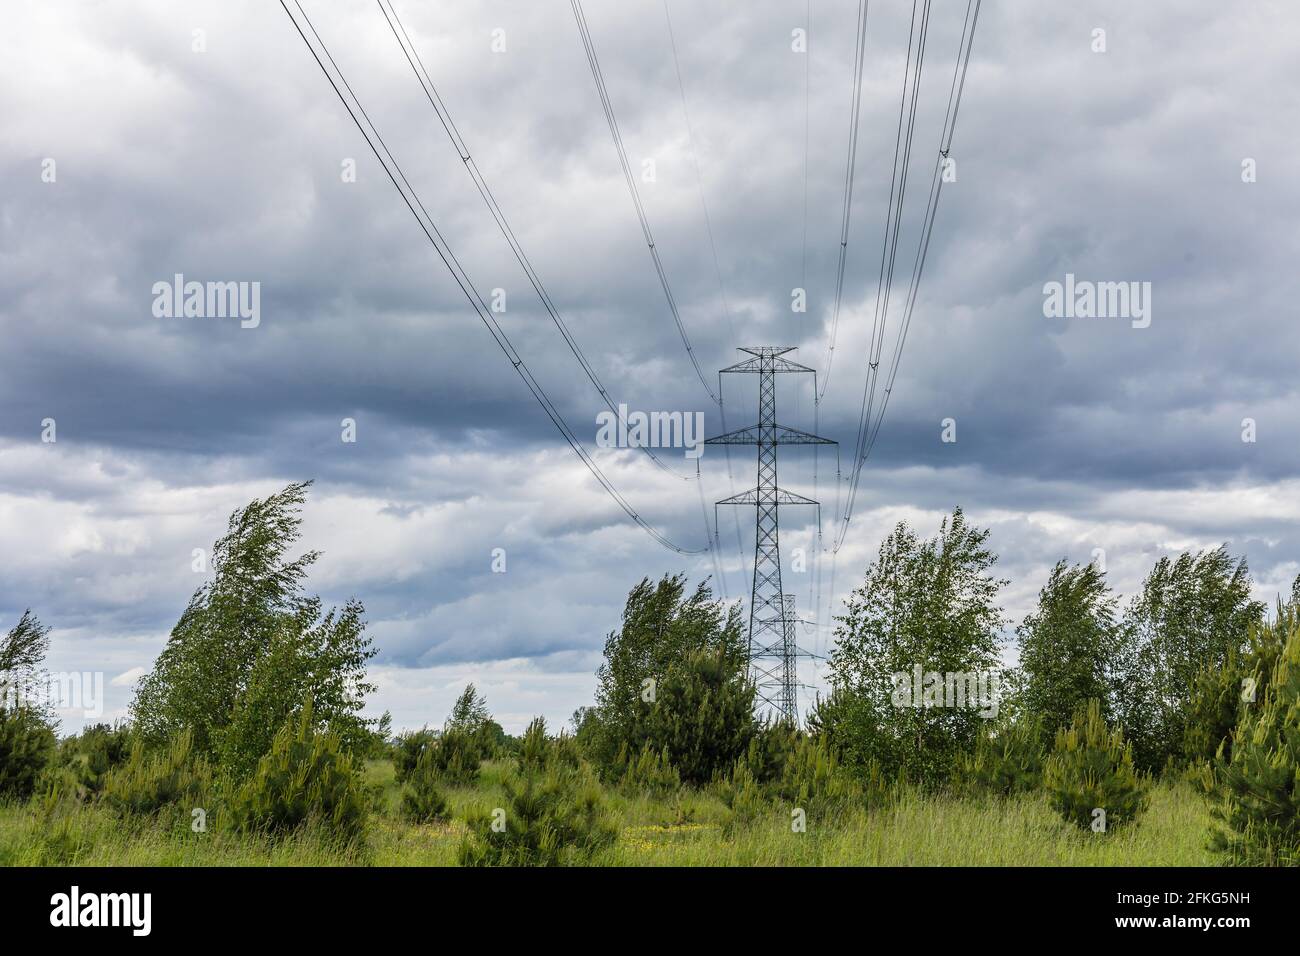 Moody sky over meadow and power line Stock Photo